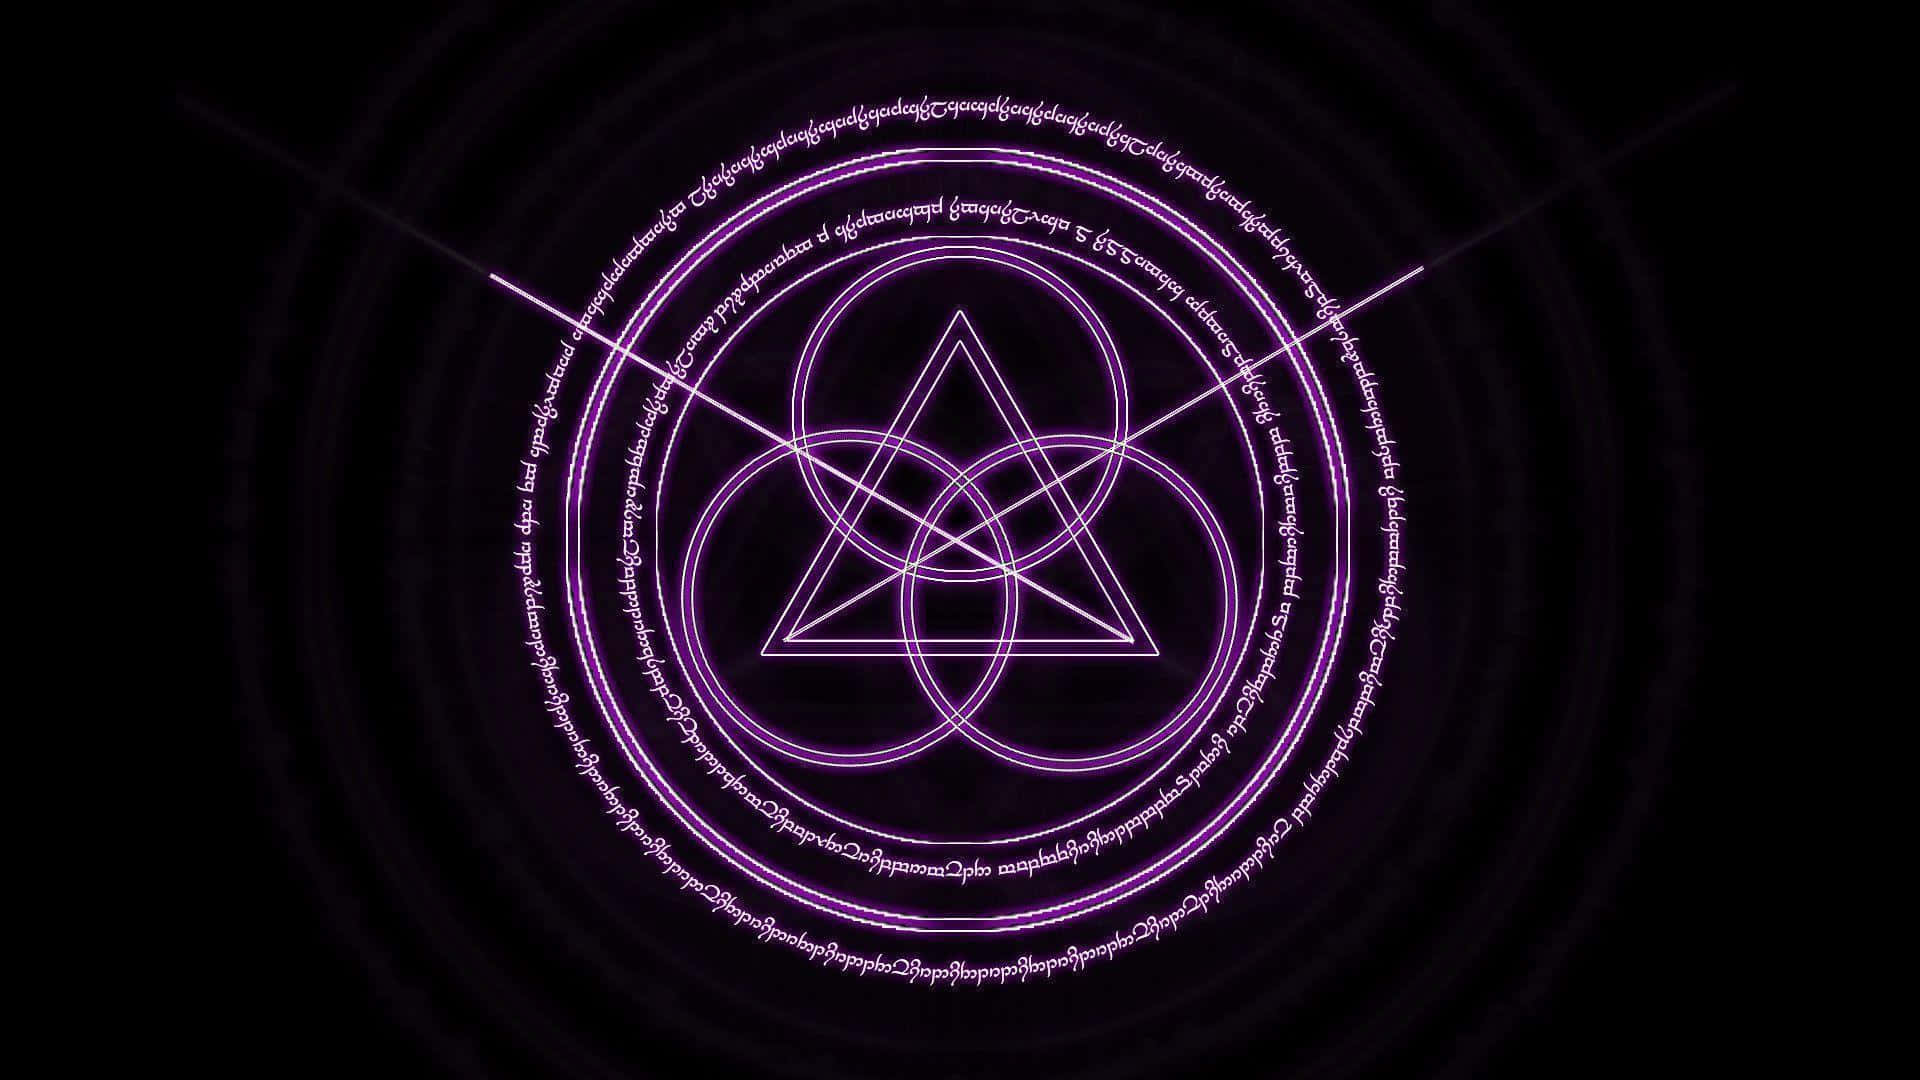 Mysterious Occult Symbolism on a Dark Wallpaper Wallpaper